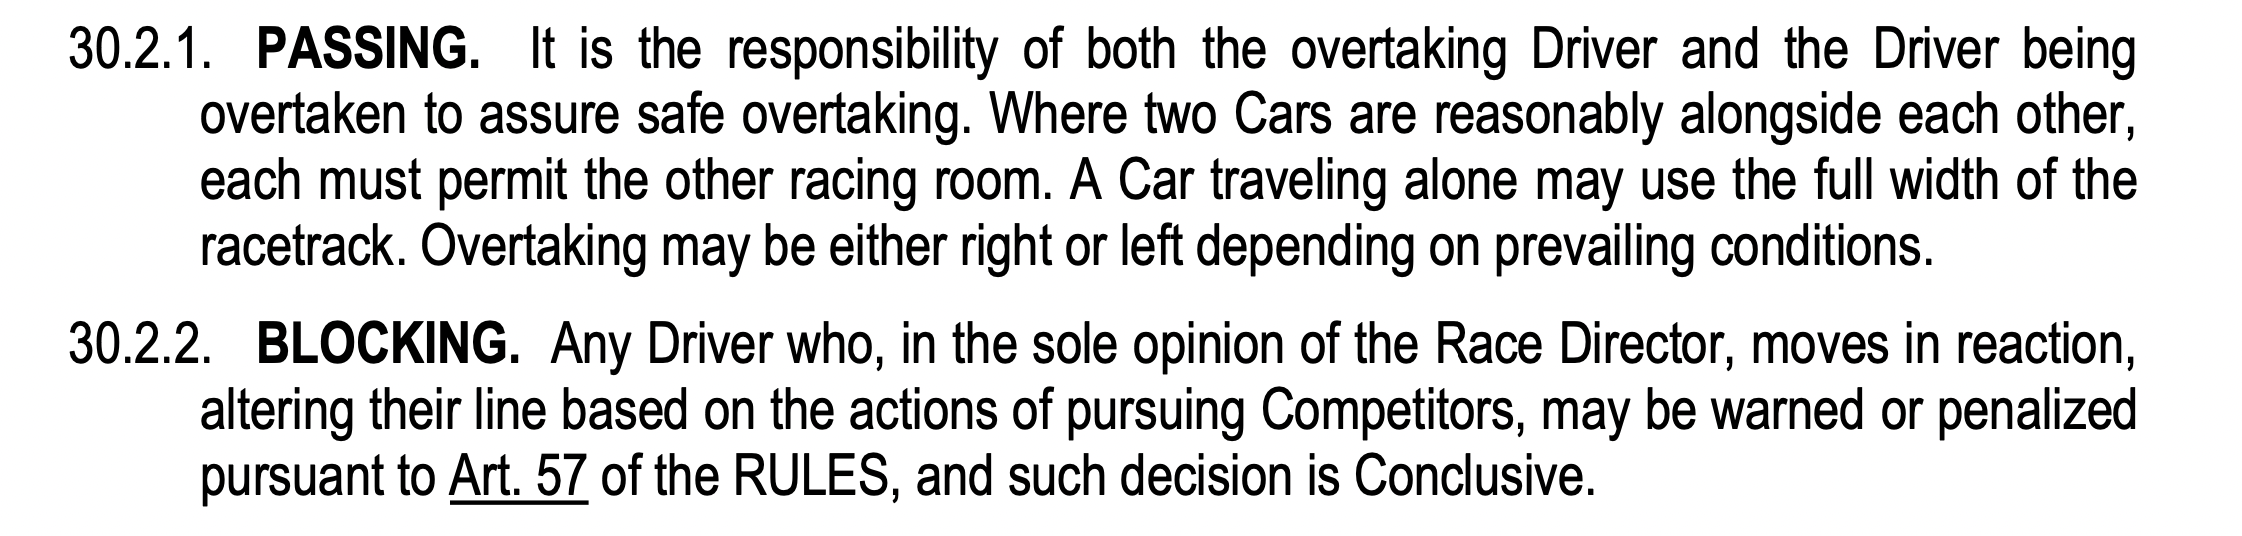 Image of IMSA rule book stating that a defensive move on the race track needs to be done proactively and not reactively.